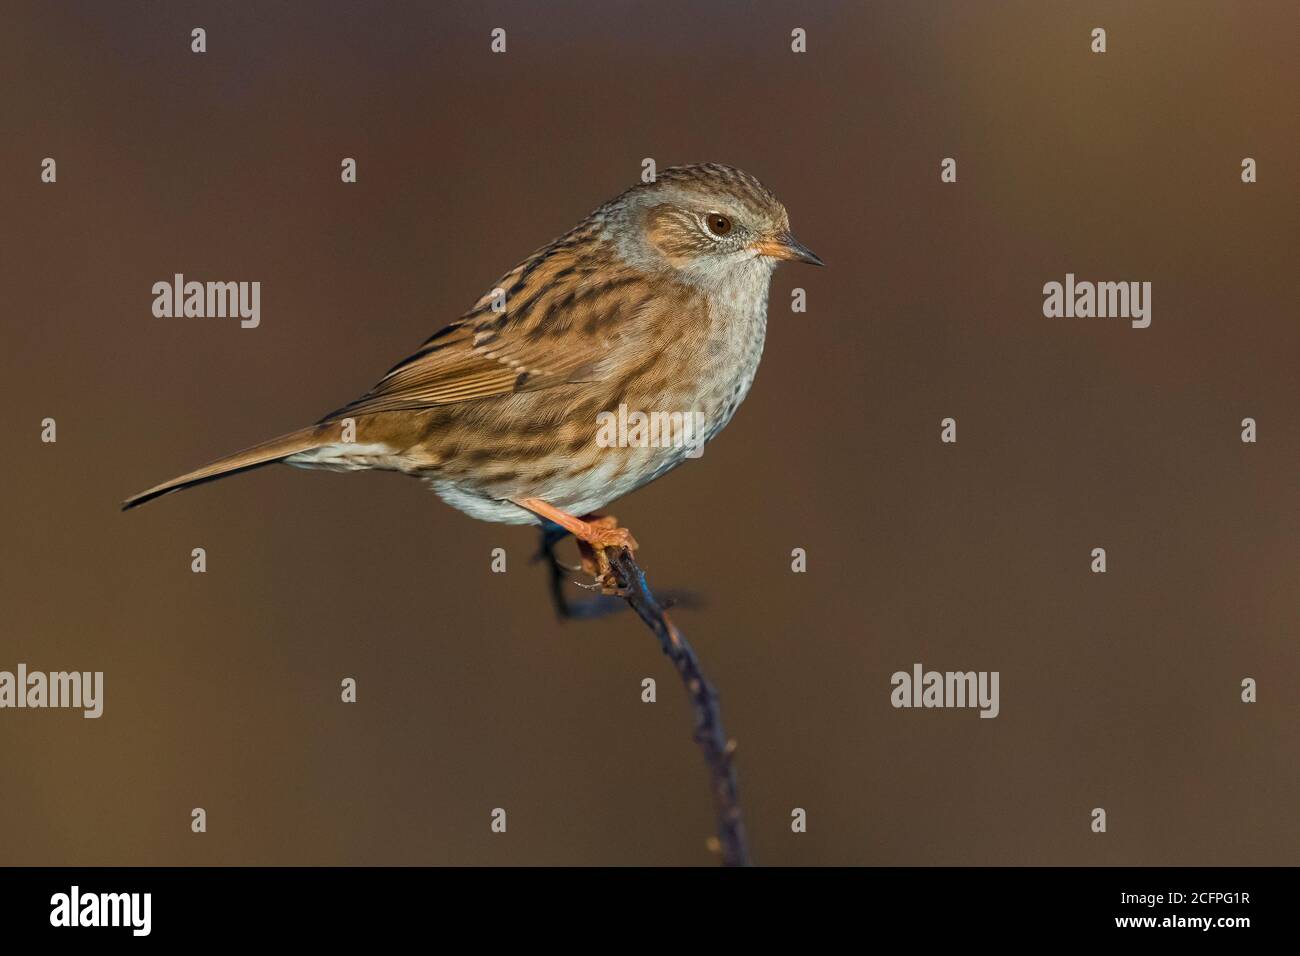 dunnock (Prunella modularis), perched on a branch with brown background, Italy, Stagno di Peretola Stock Photo